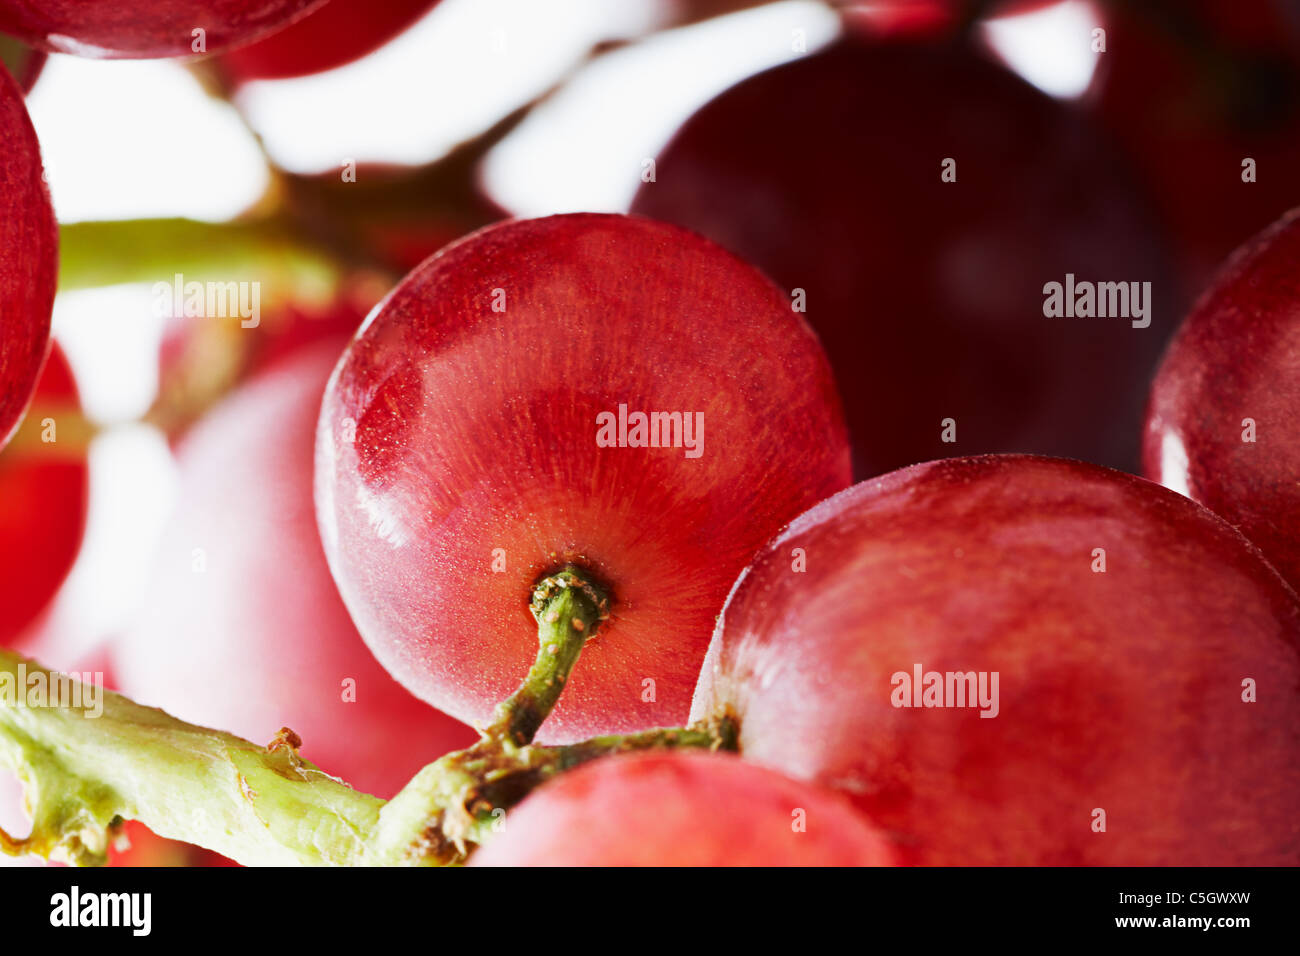 close up of a cluster of red grapes Stock Photo